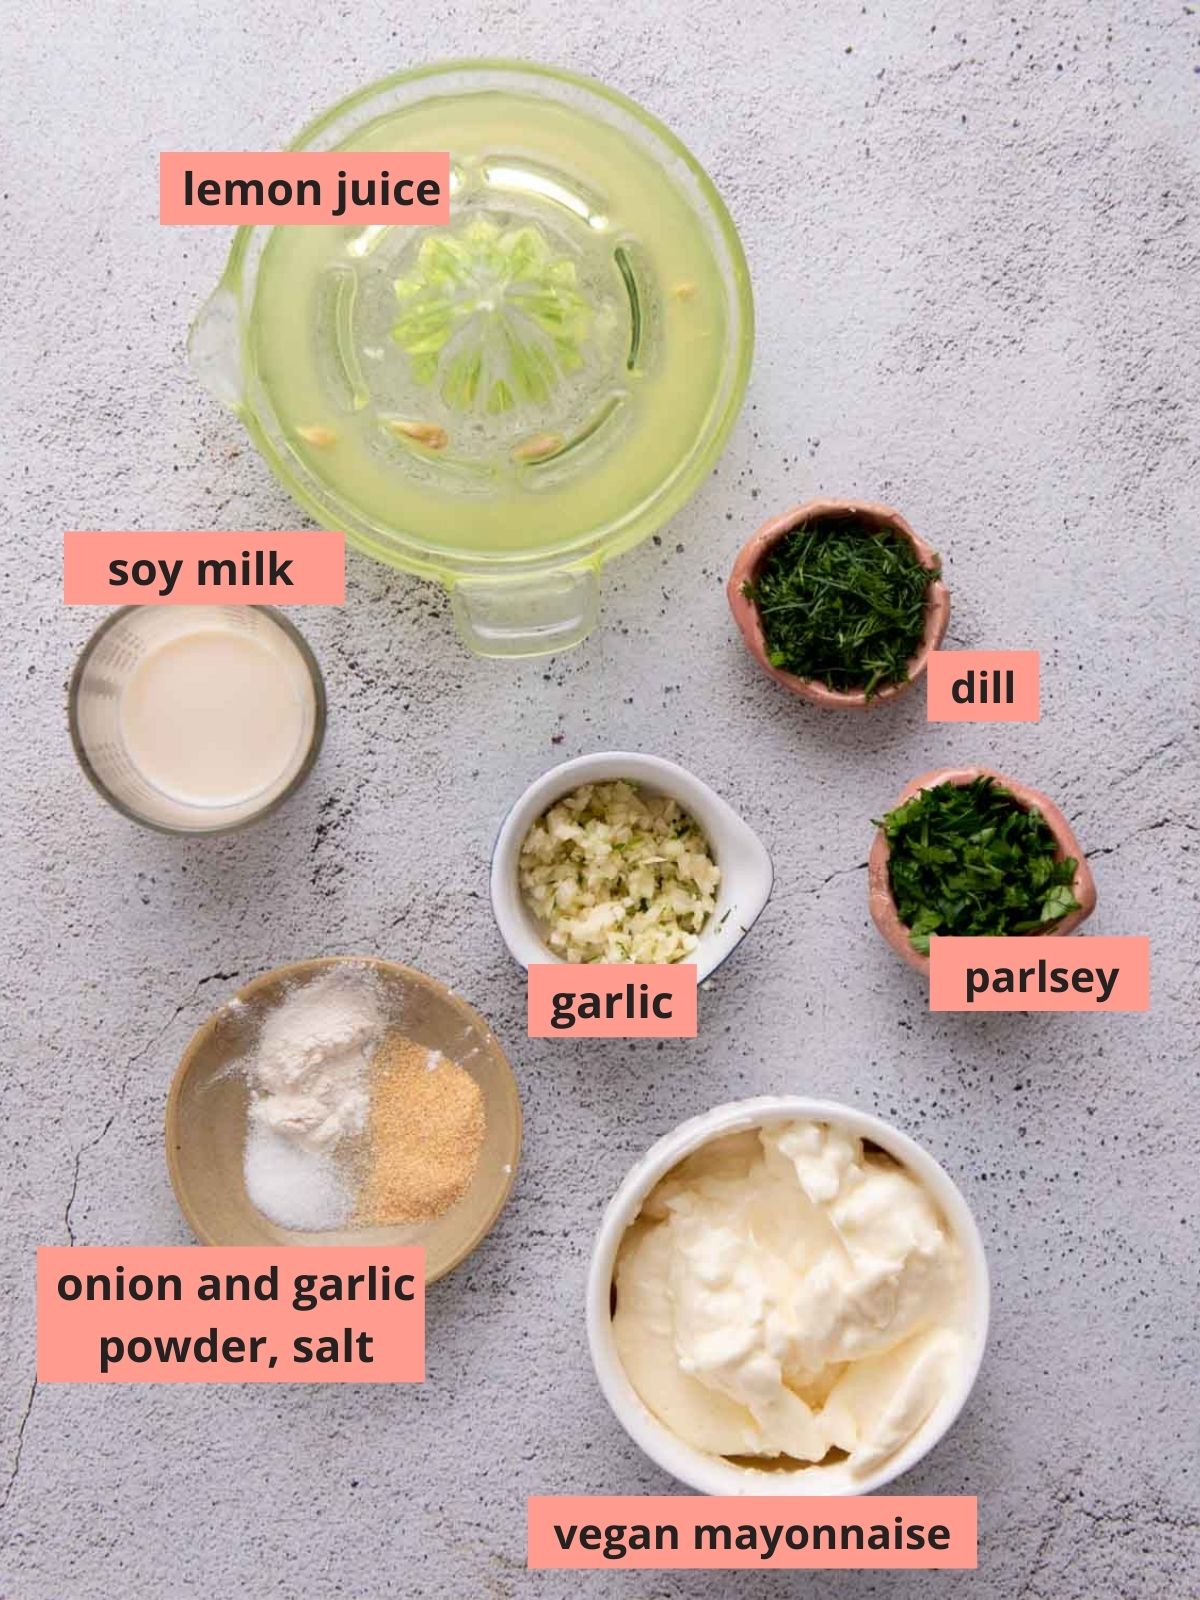 Labeled ingredients used to make ranch dressing.